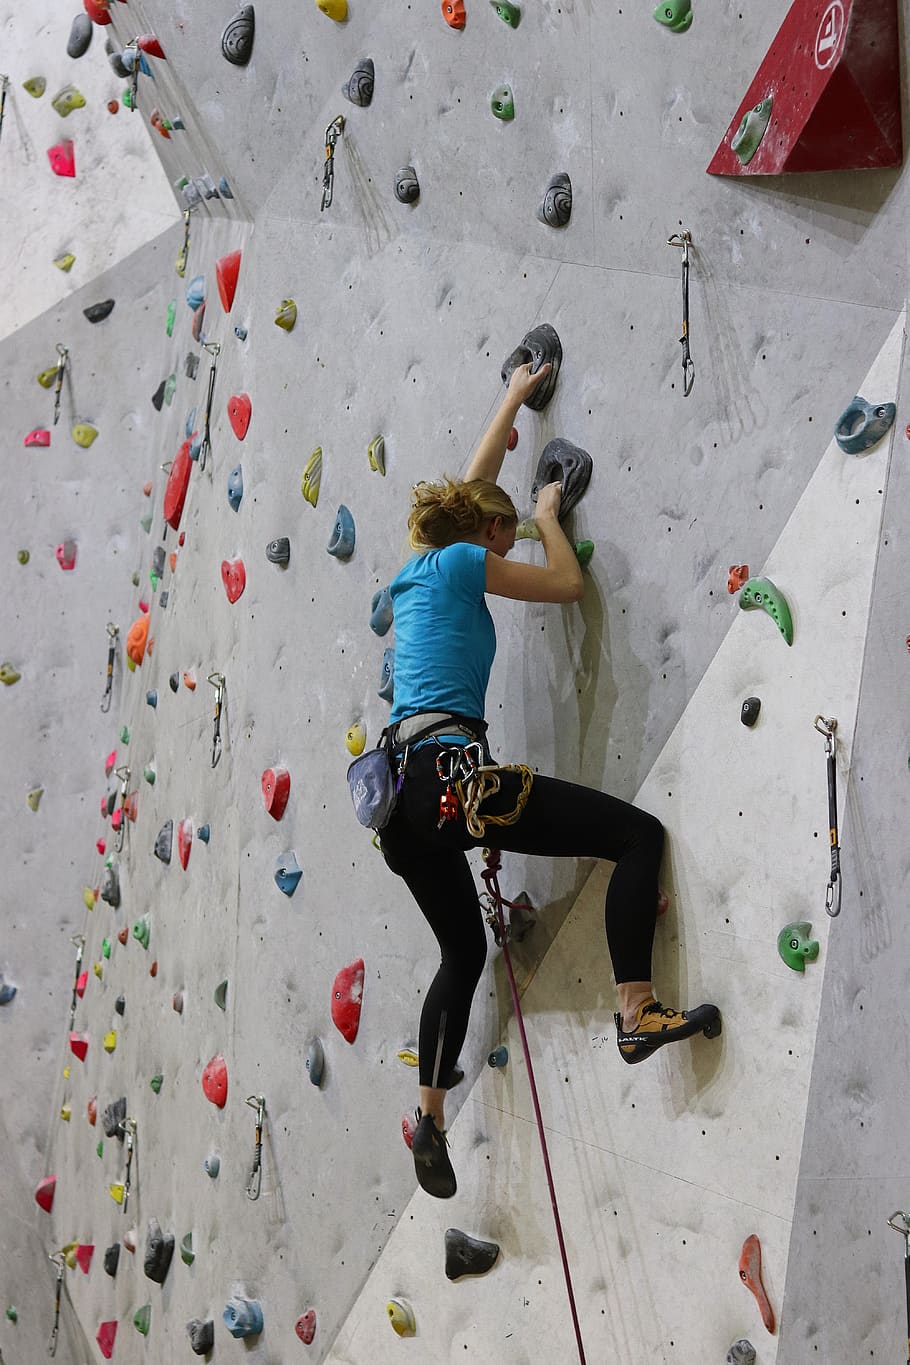 Hd Wallpaper Rock Climbing Wall Performance Extreme Sports Healthy Lifestyle Wallpaper Flare